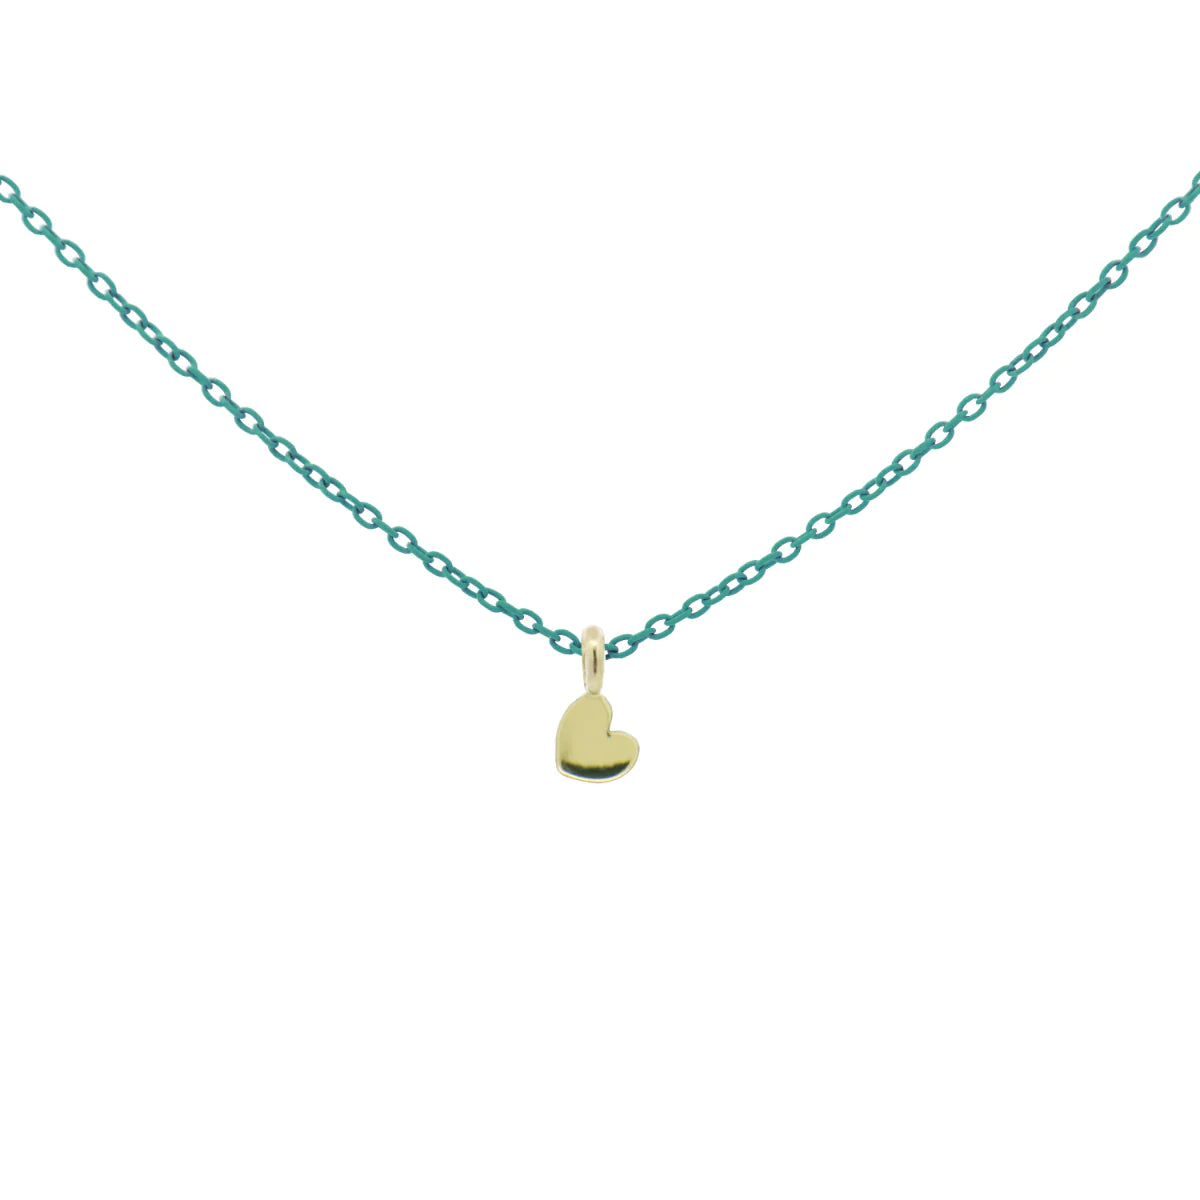 Choker with 18kt Gold Heart and Painted Chain - Moregola Fine Jewelry